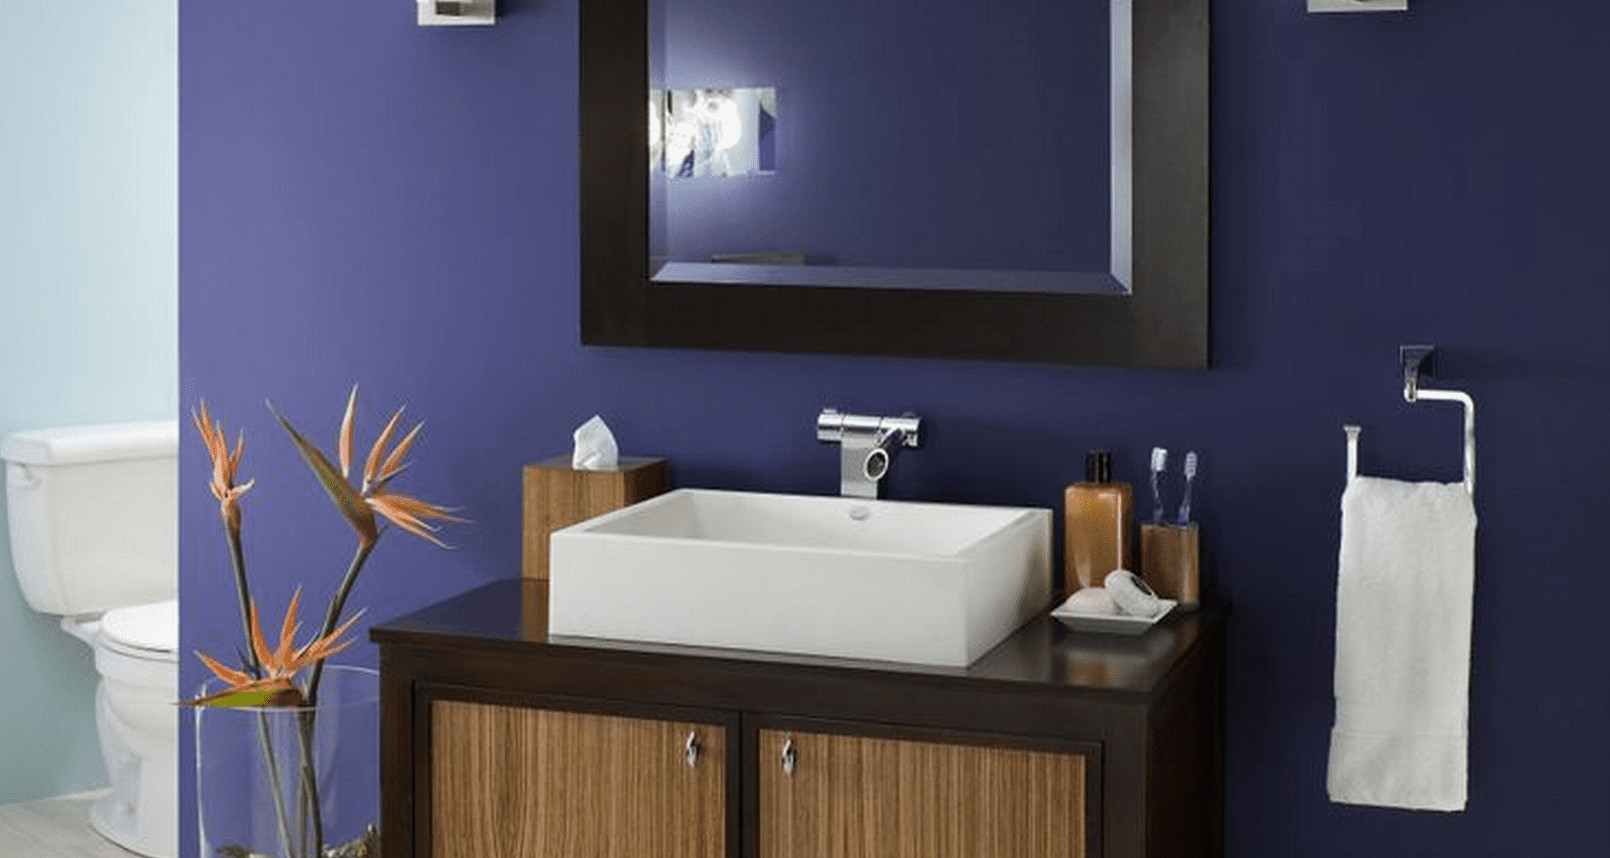 Paint Colors For The Bathroom
 The Best Paint Colors for a Small Bathroom